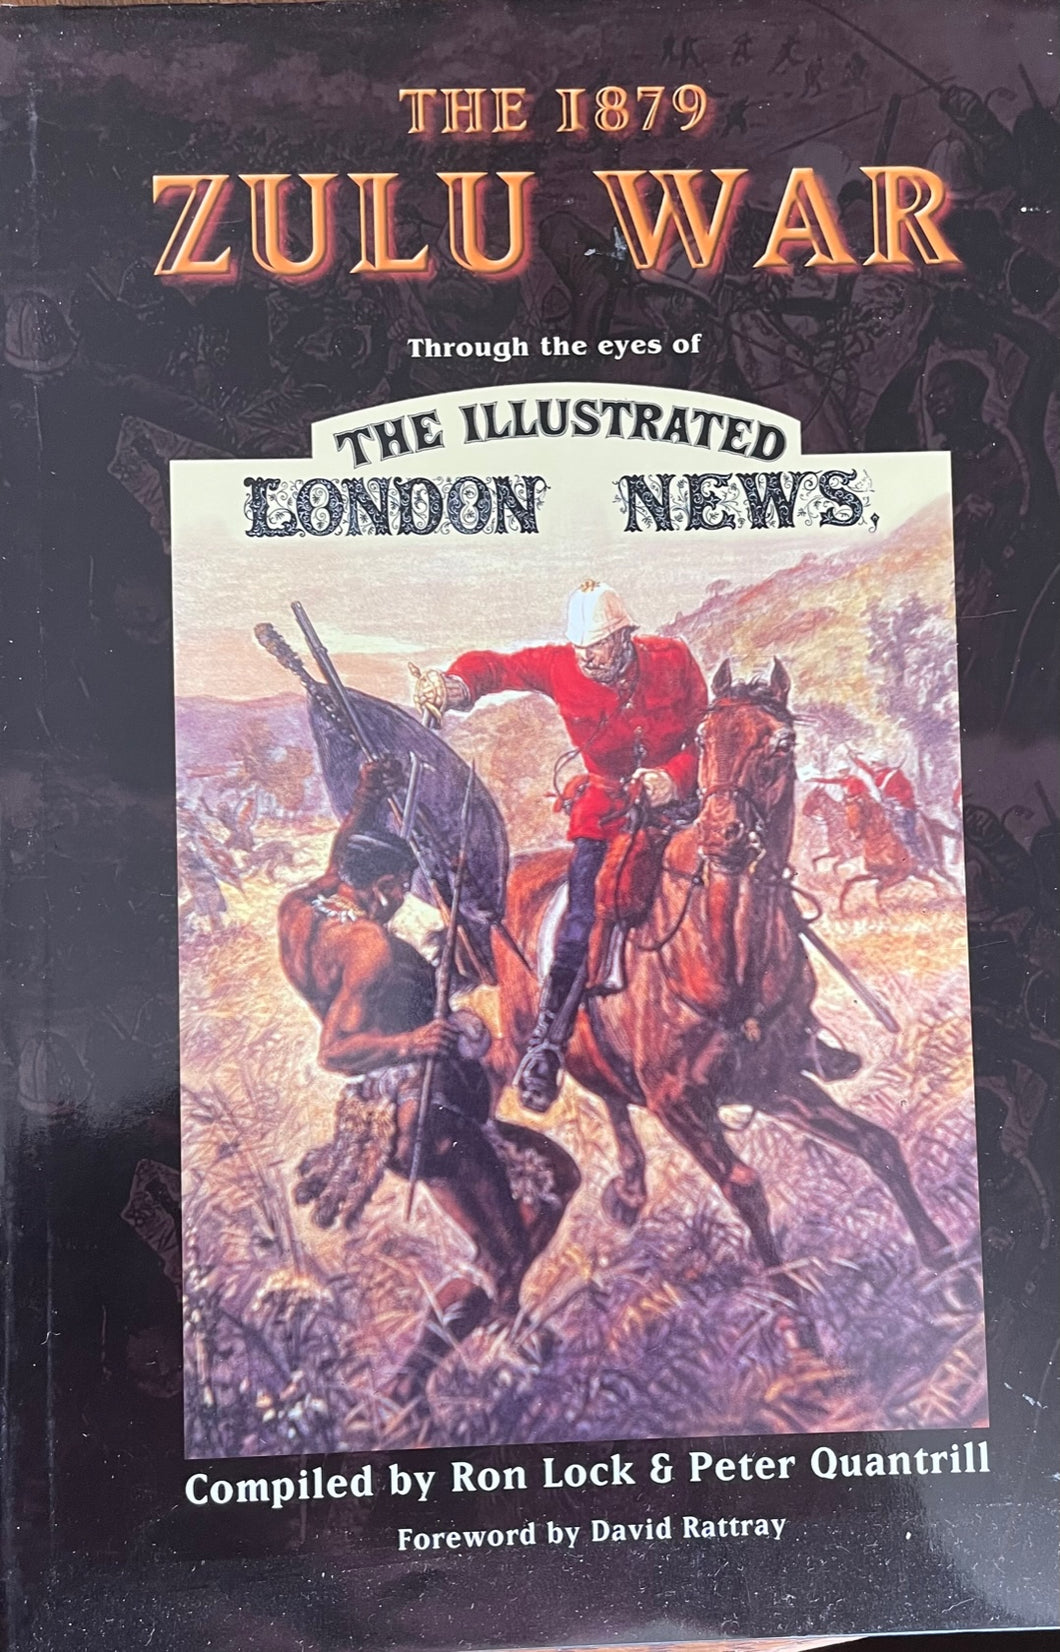 THE 1879 ZULU WAR THROUGH THE EYES OF THE ‘ILLUSTRATED LONDON NEWS’, compiled by Ron Lock and Peter Quantrill.